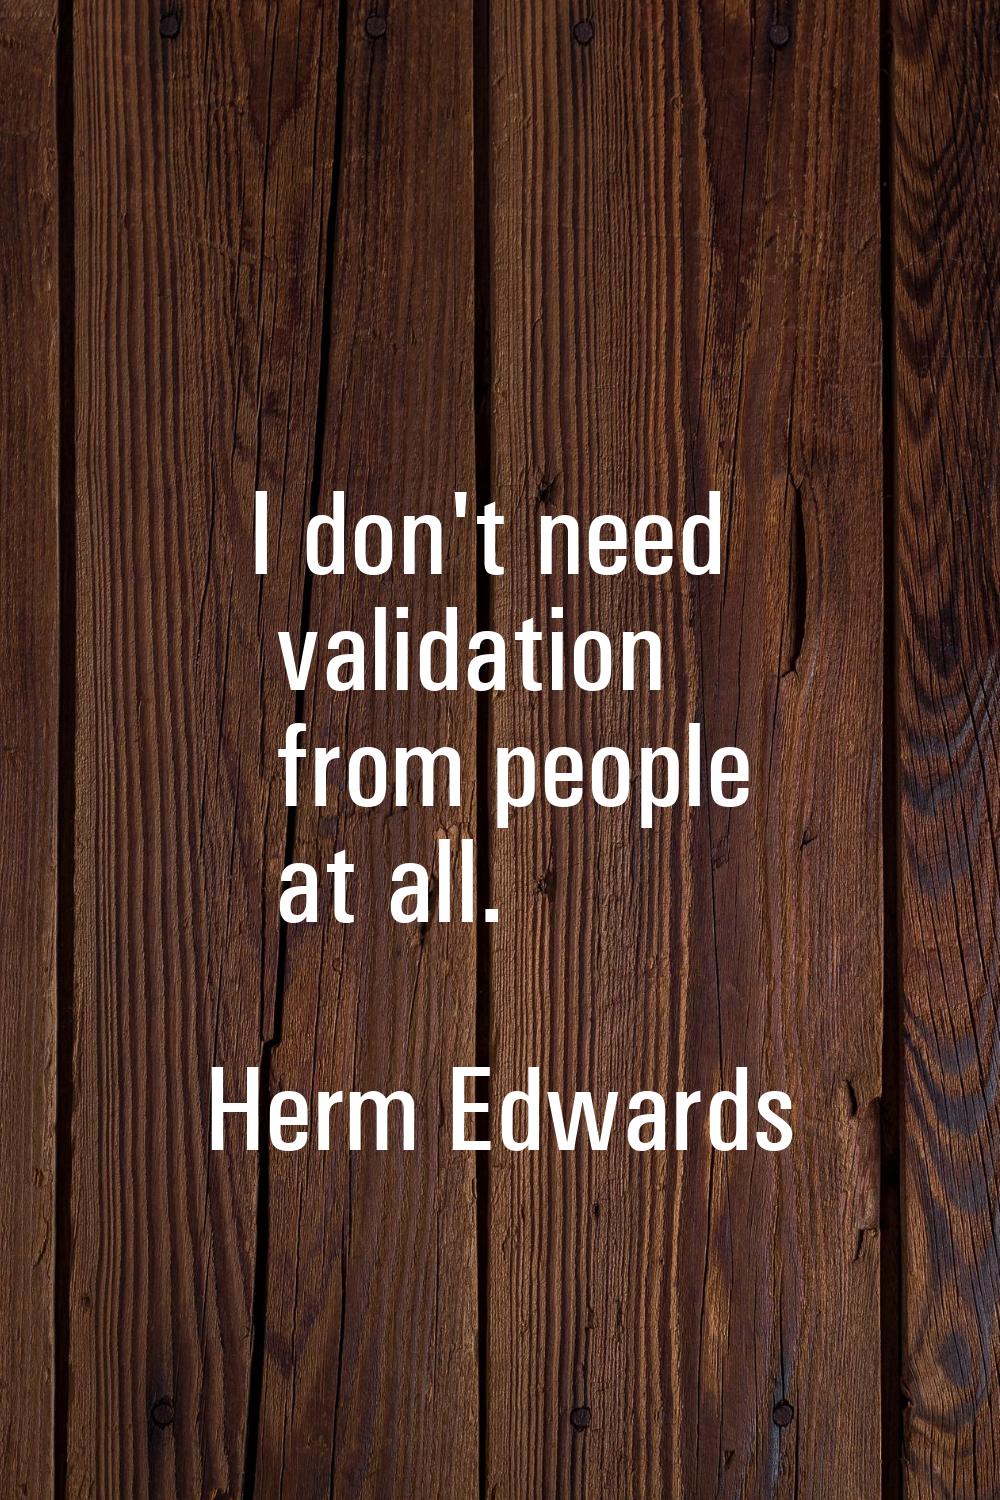 I don't need validation from people at all.